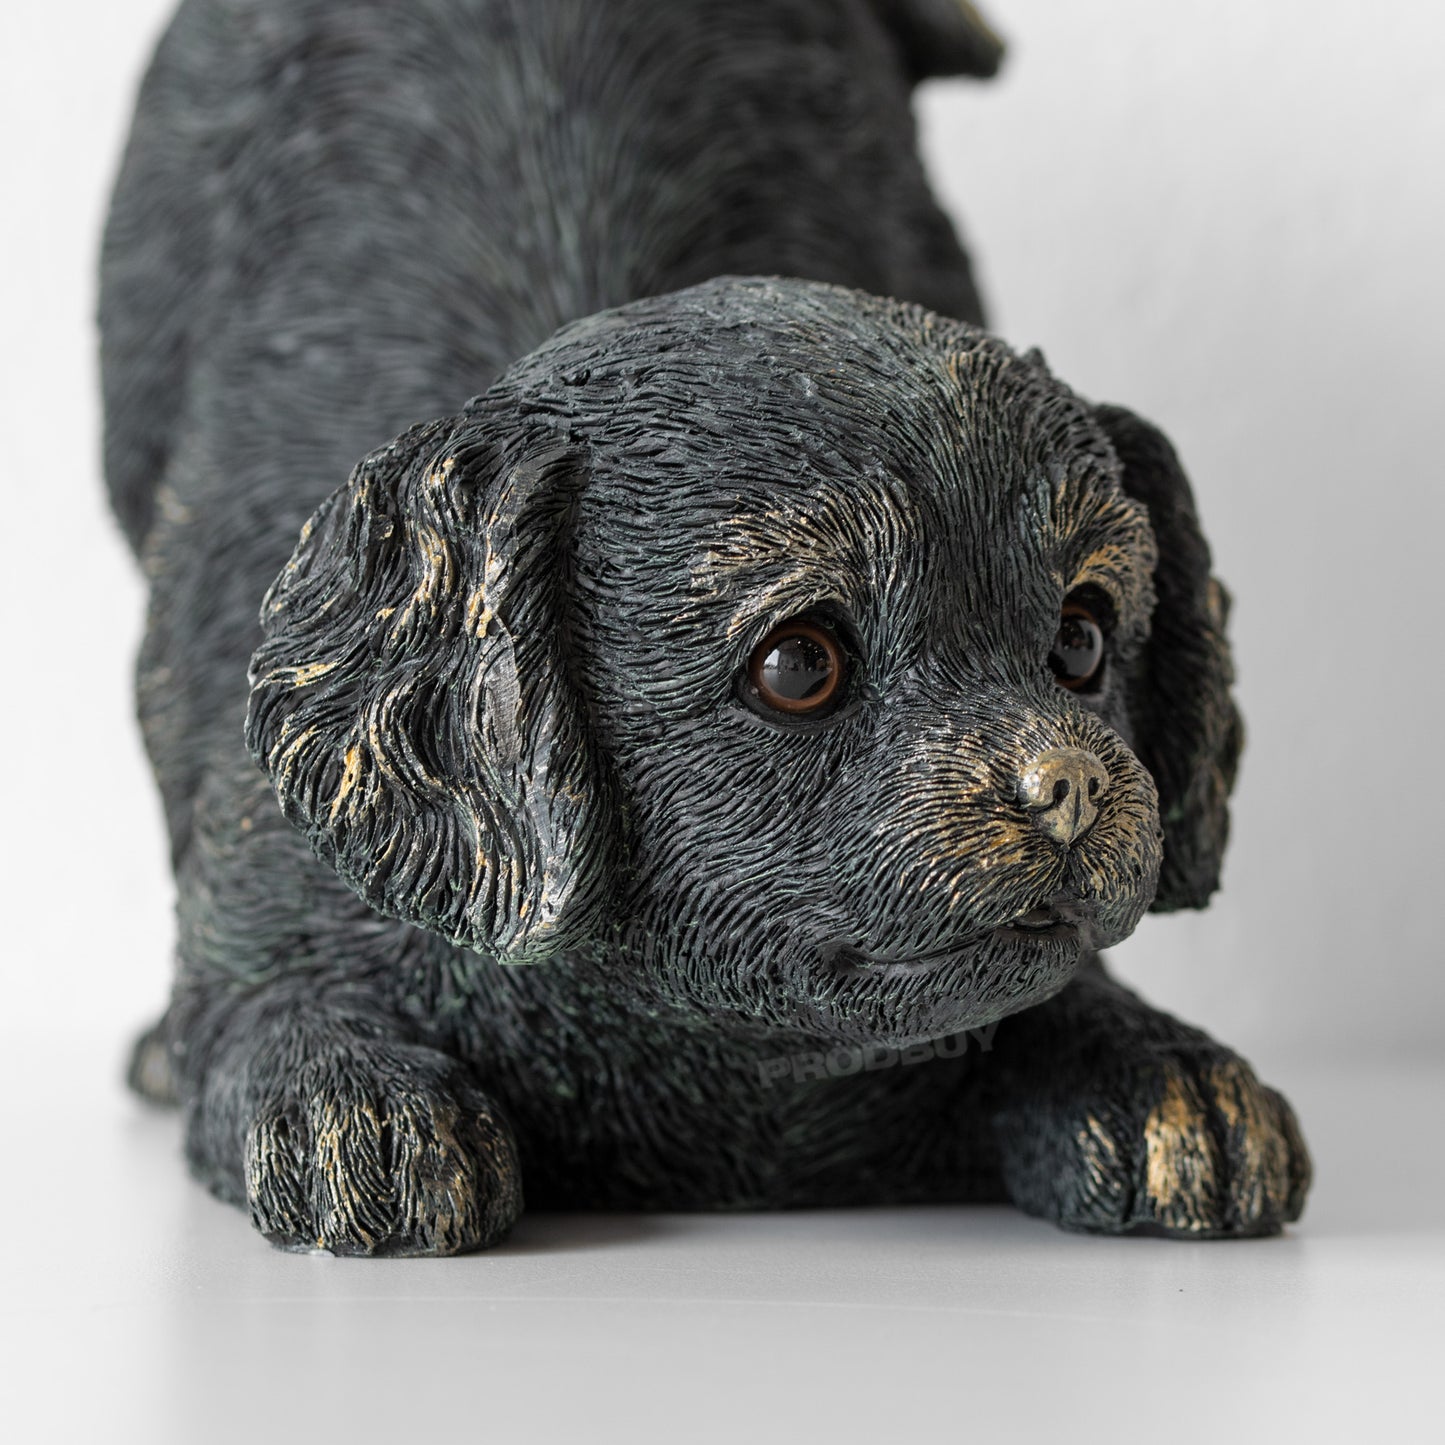 Playful Spaniel Dog Bookend Ornament